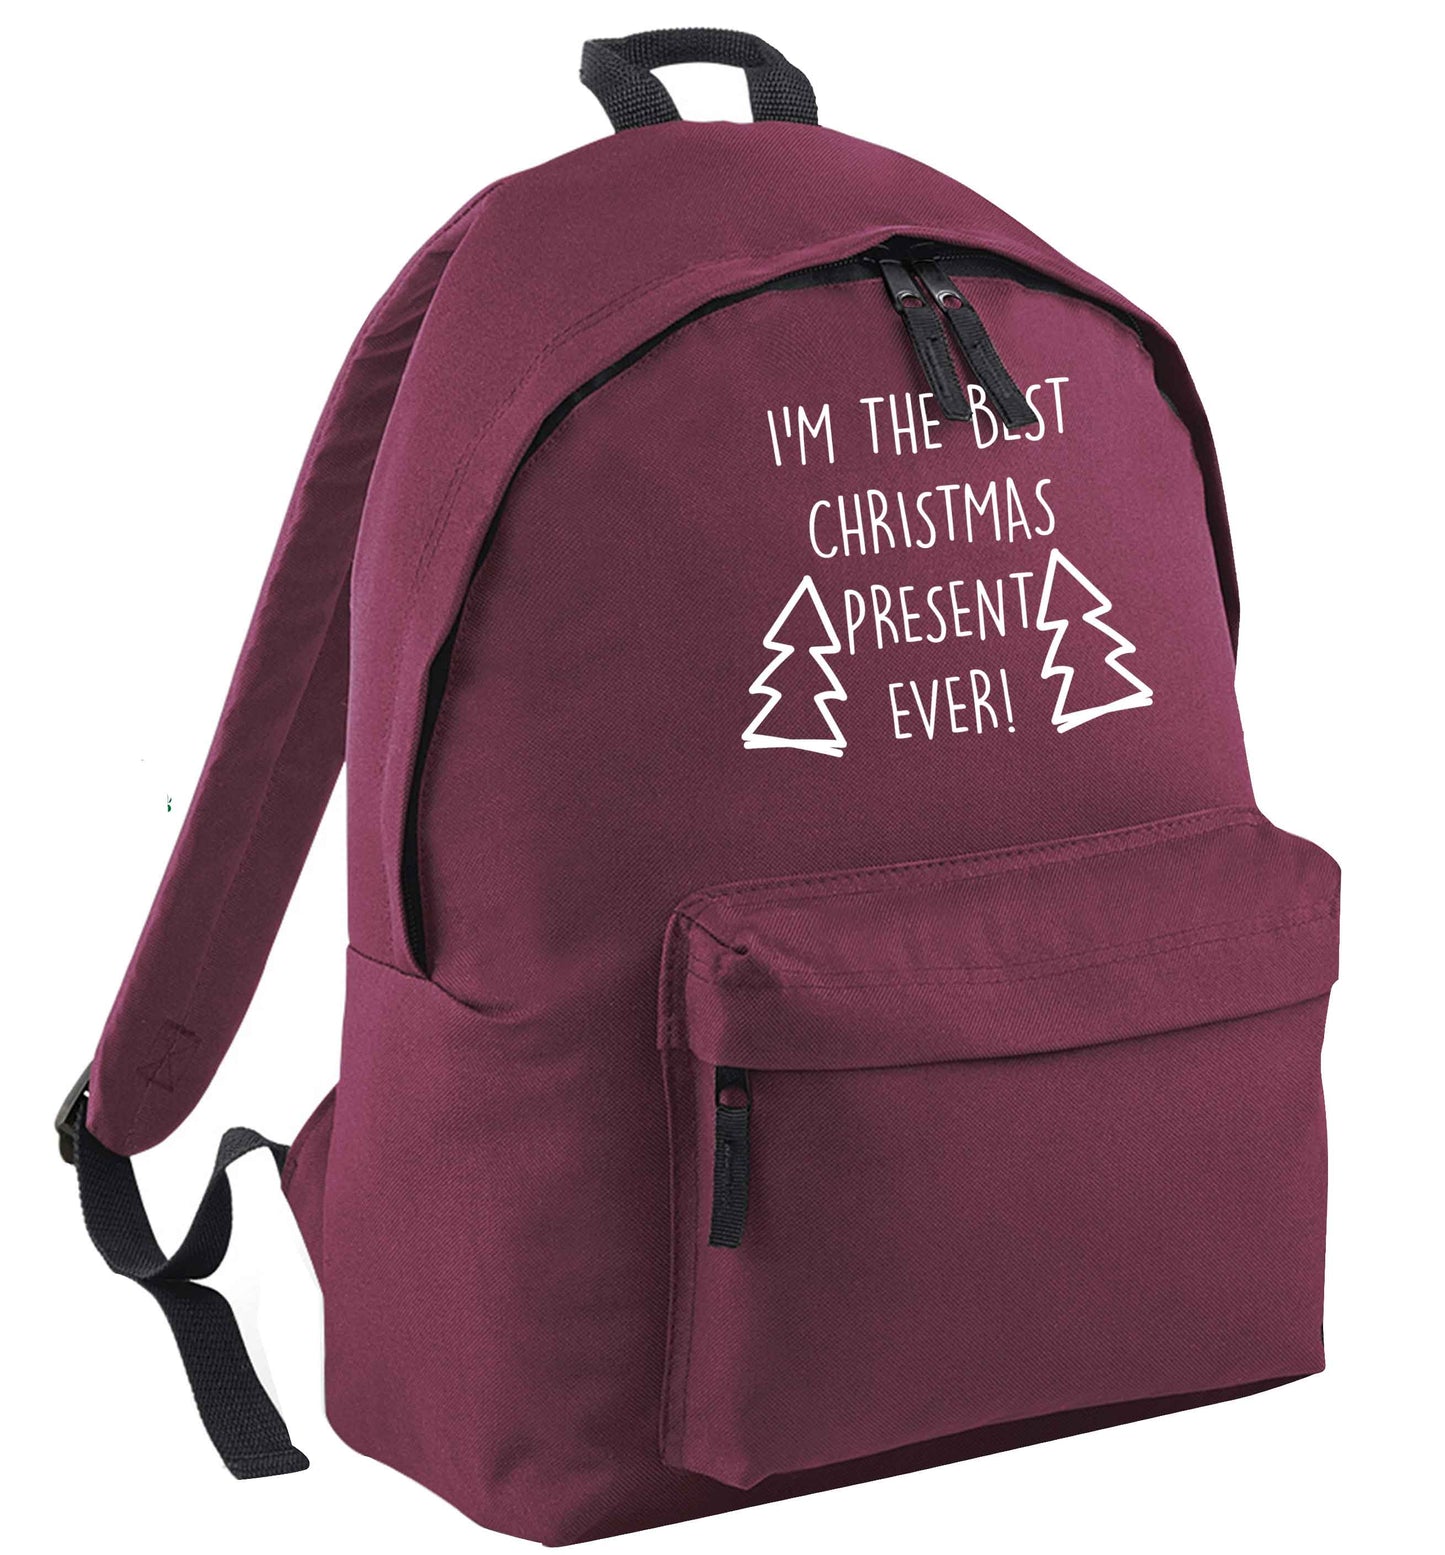 I'm the best Christmas present ever maroon adults backpack